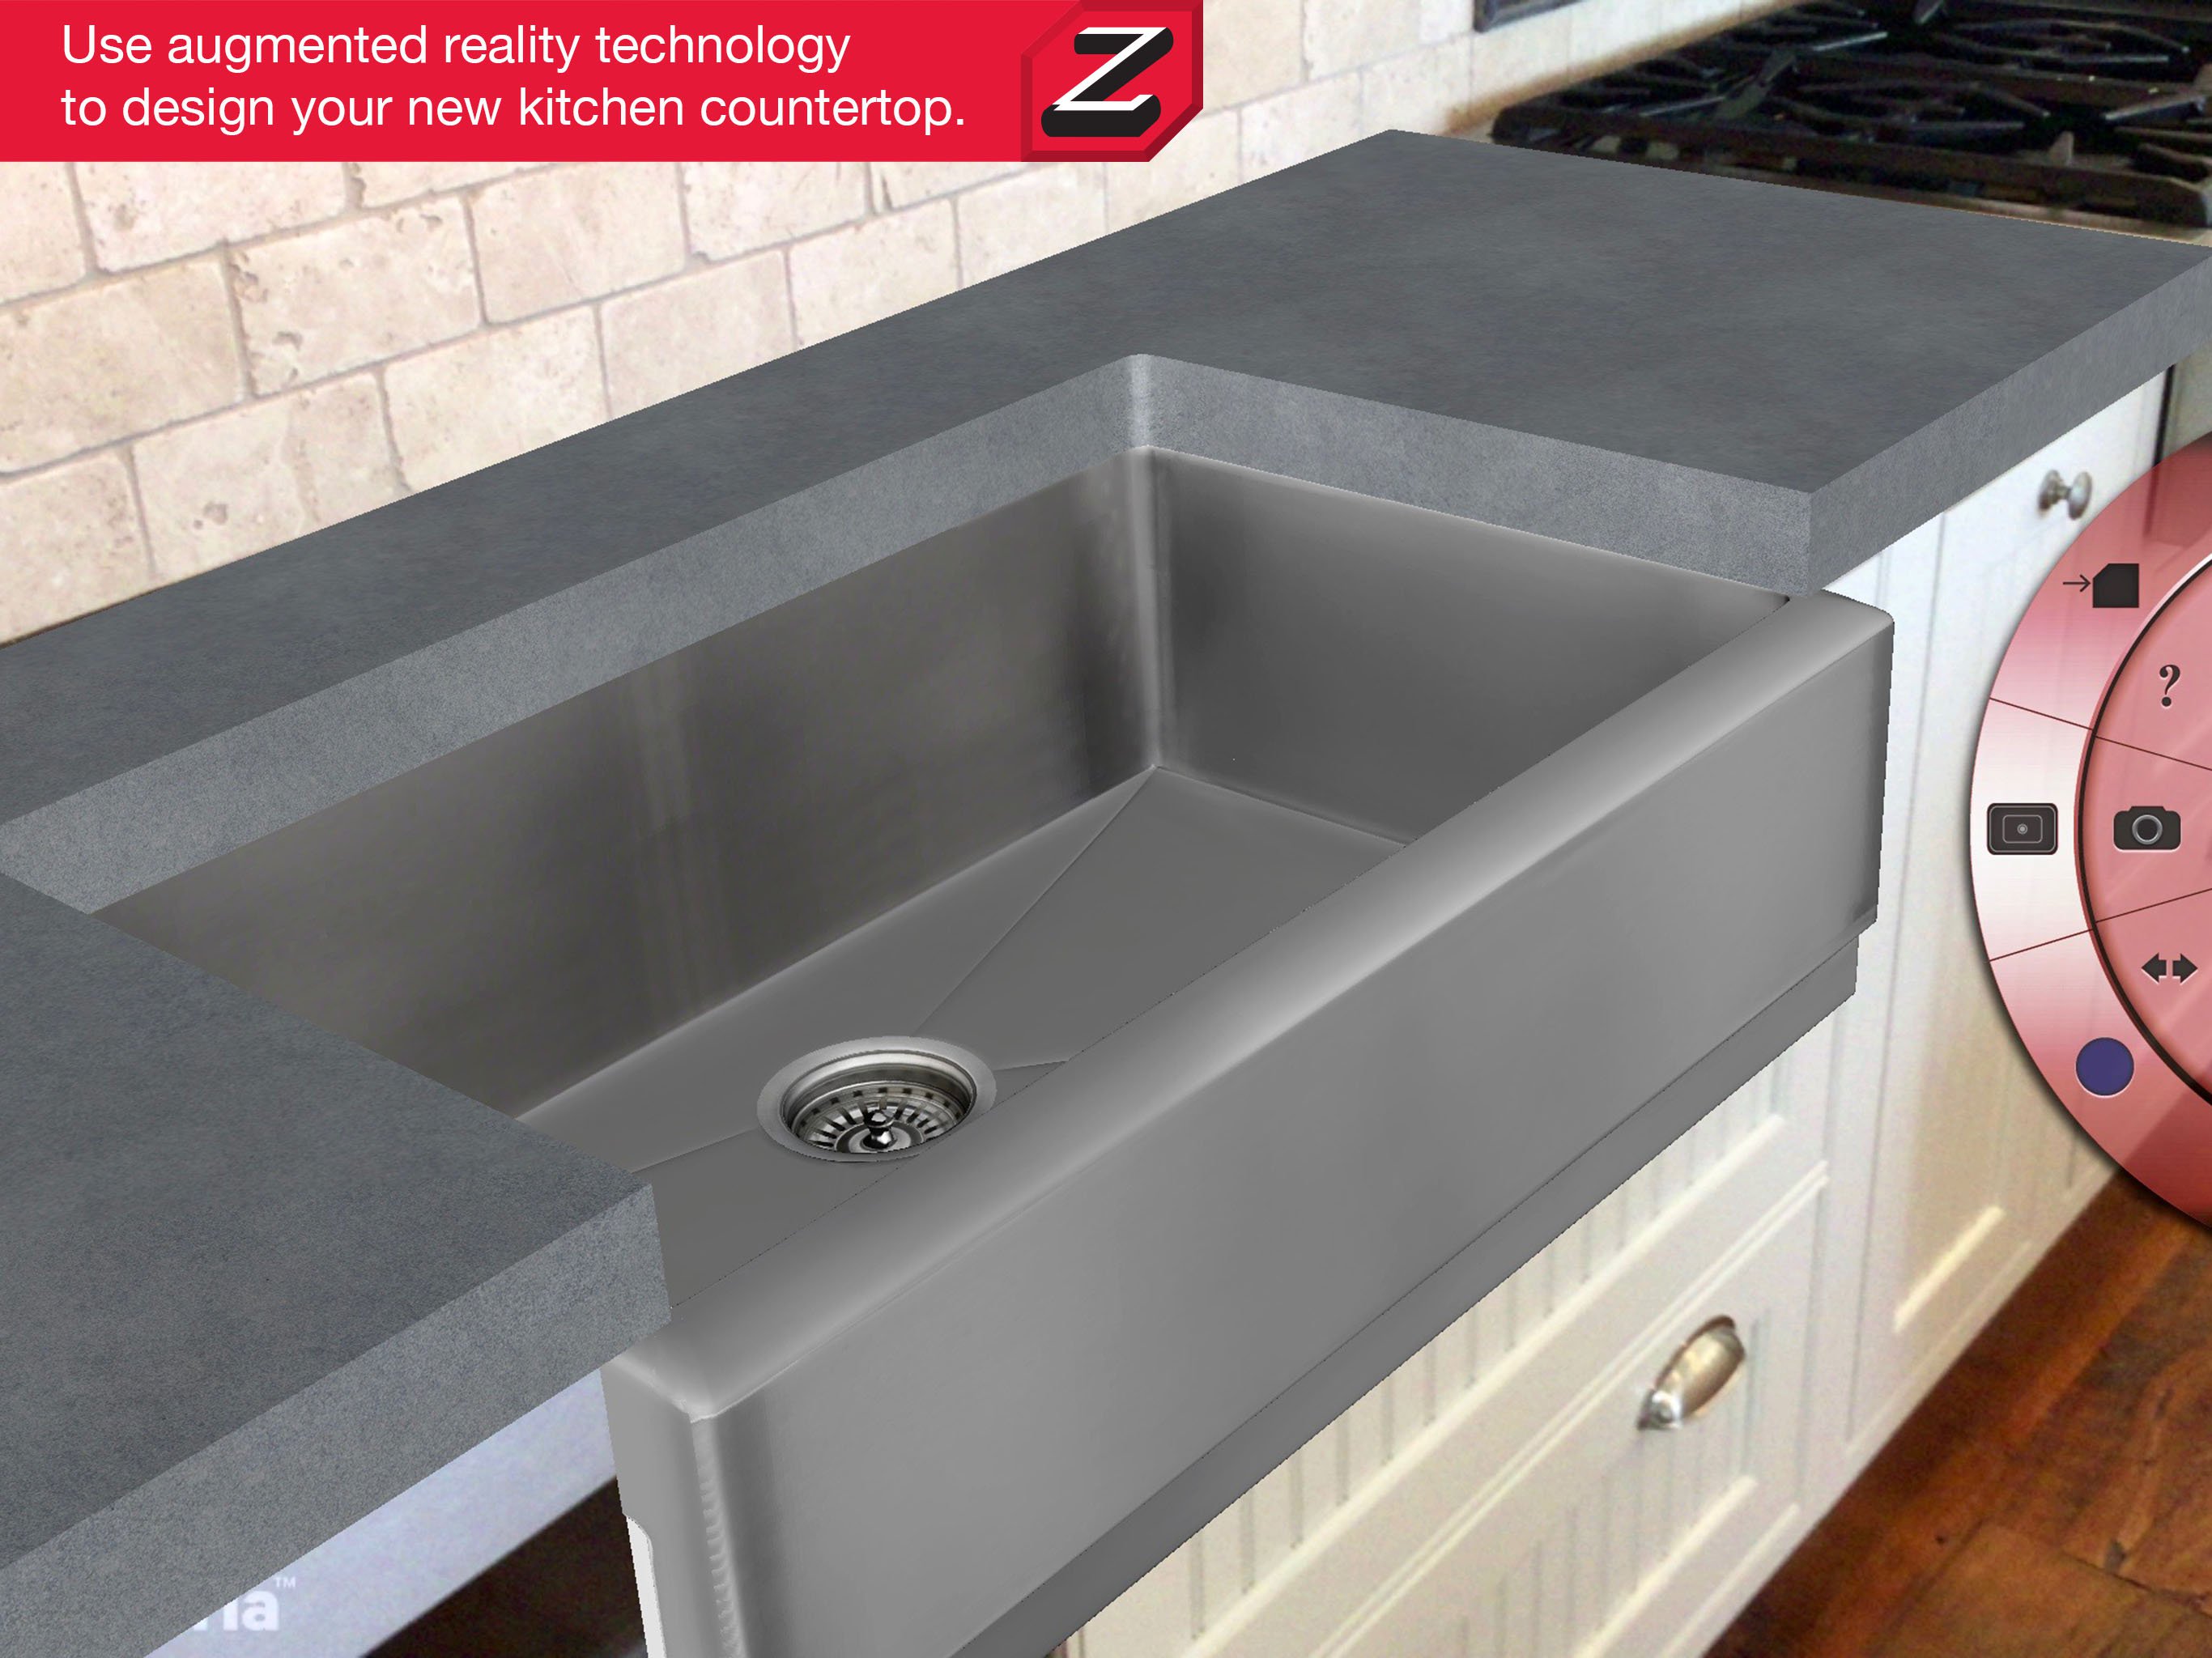 Concrete Countertop Solutions Releases Augmented Reality Ipad